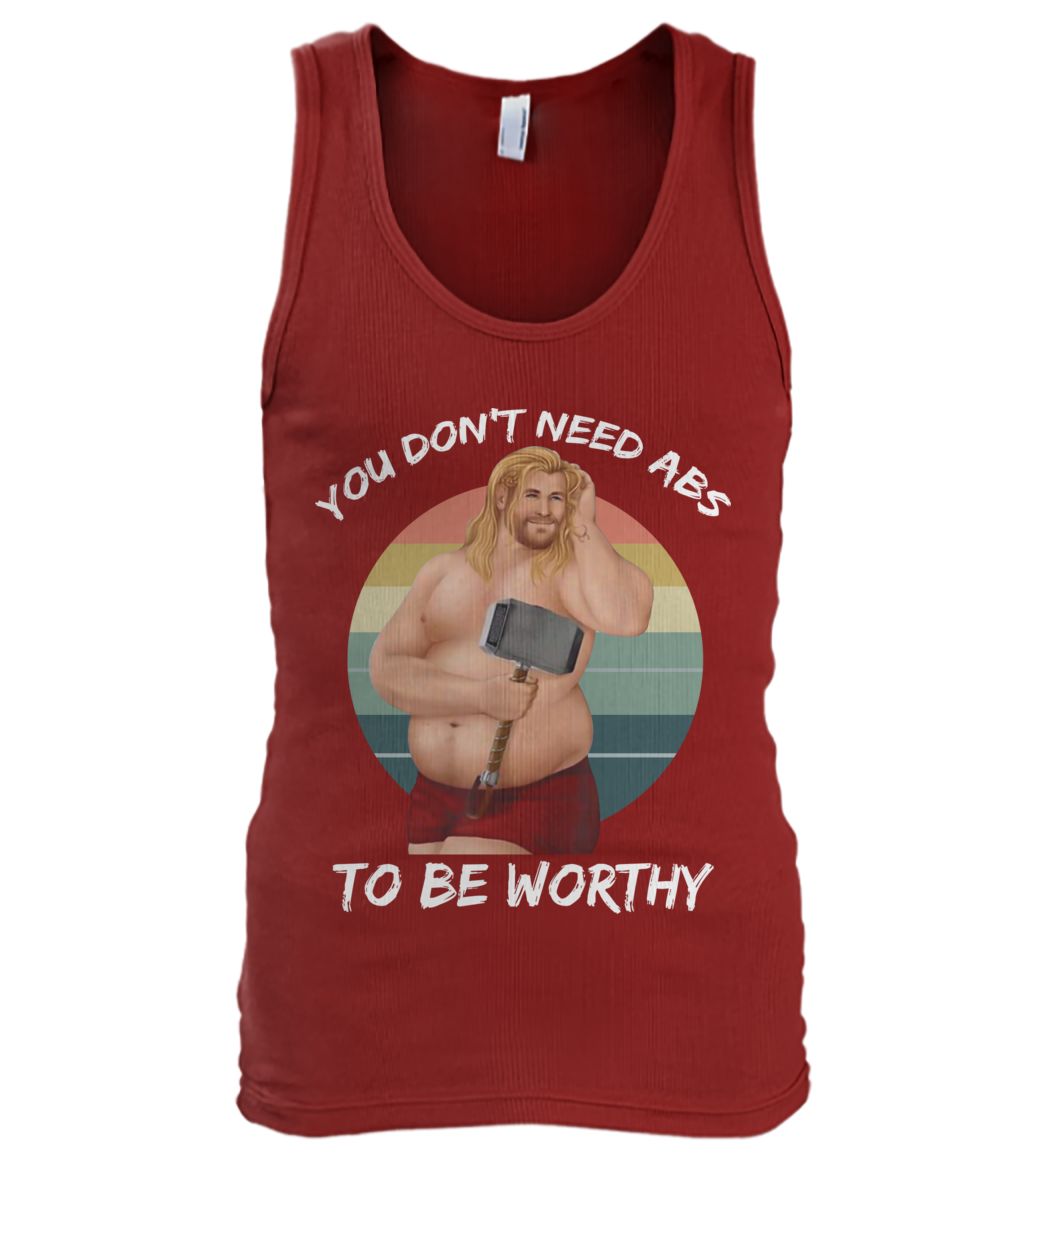 Vintage fat-thor you don't need abs to be worthy men's tank top